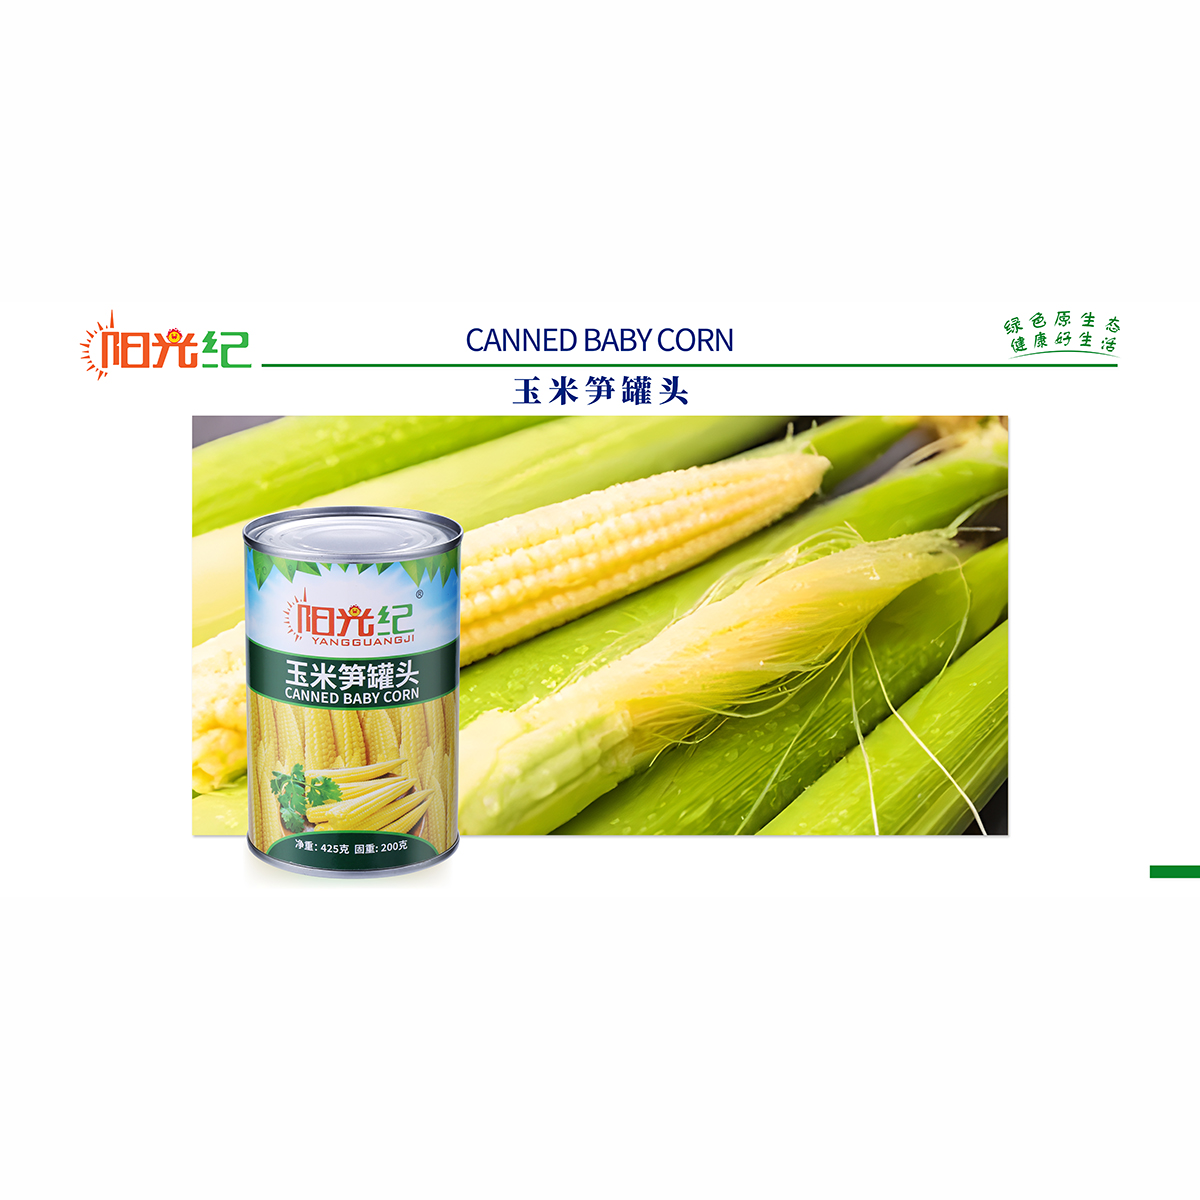 CANNED BABY CORN 425G